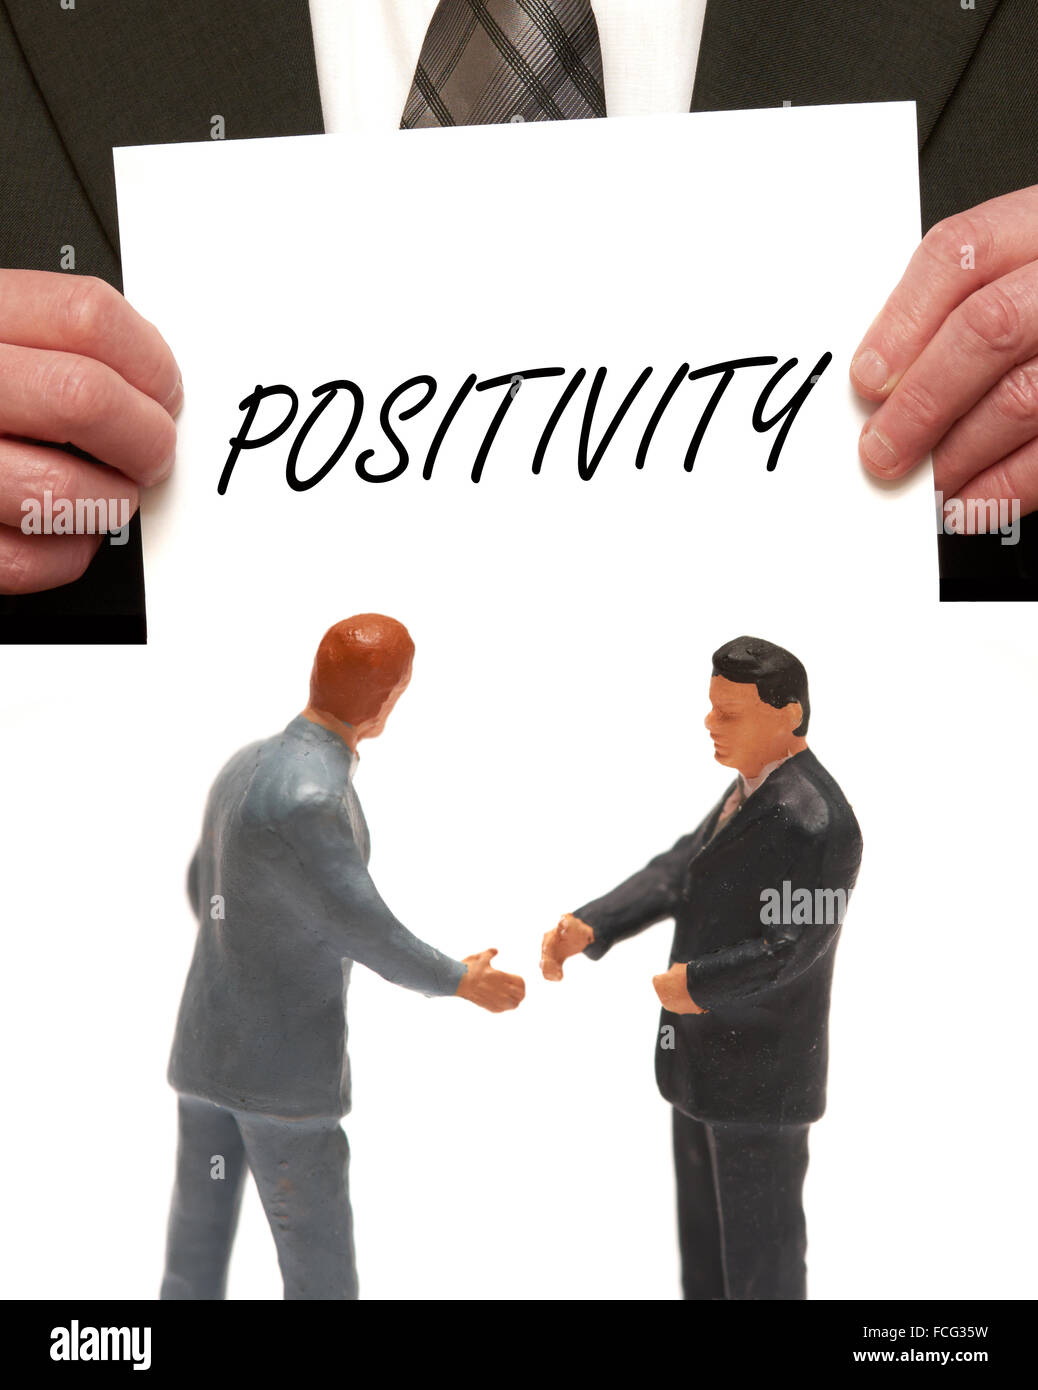 Positivity concept 2 miniature figurines in suits shaking hands Stock Photo